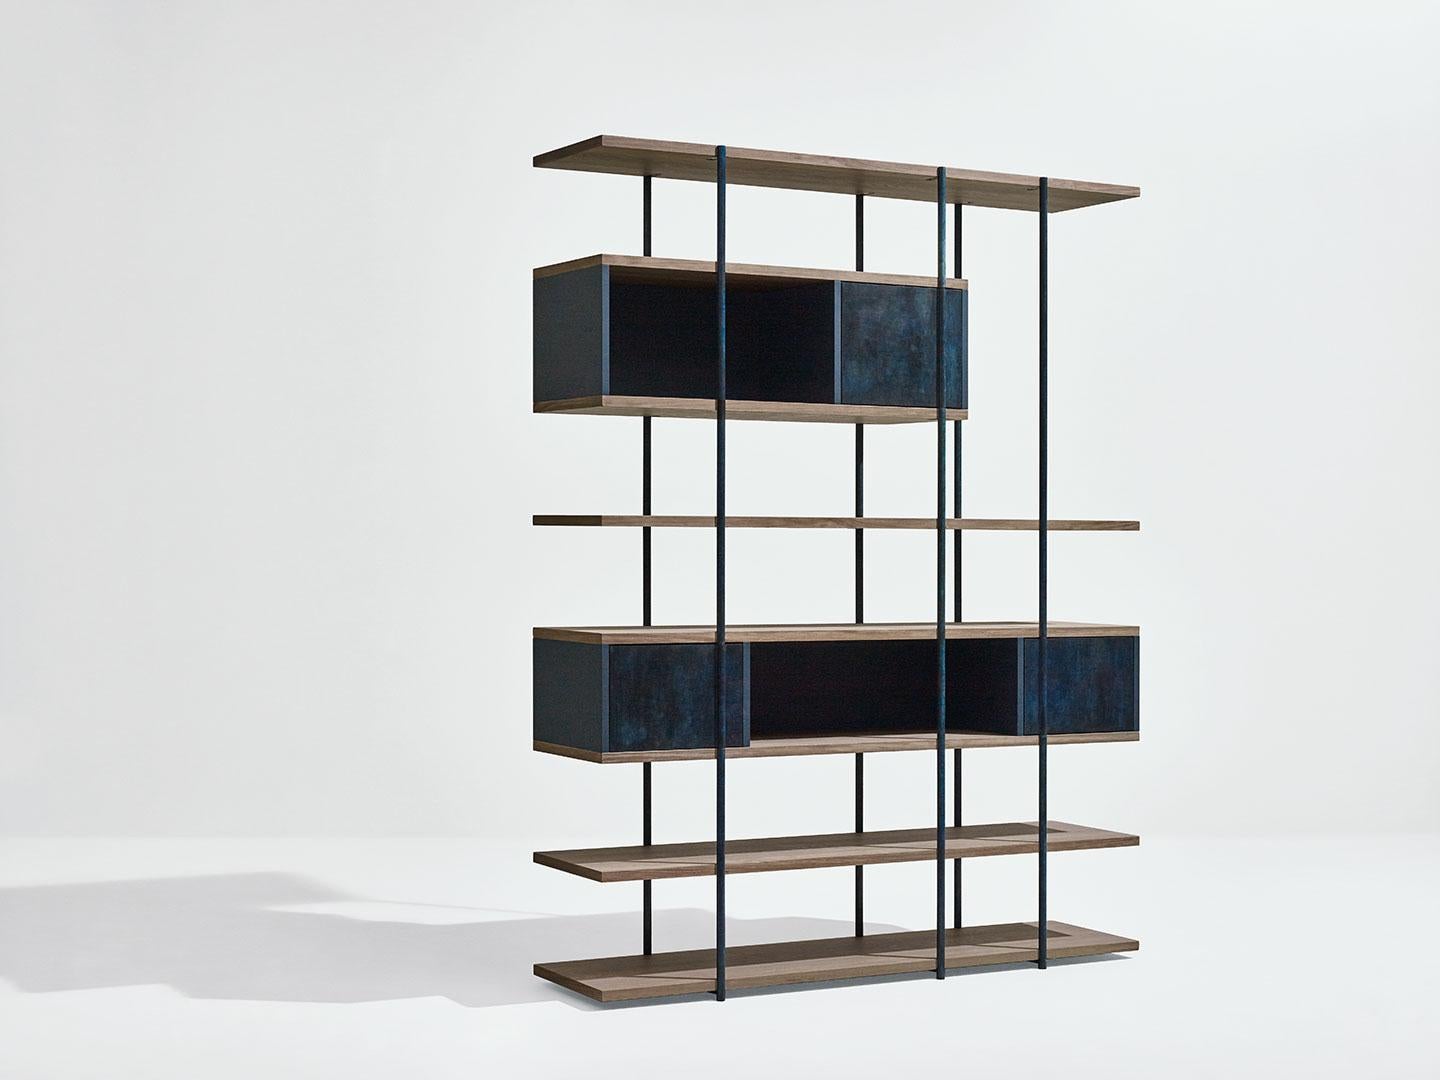 Pivot bookshelf by SEM
Dimensions: W156 x D38 x H203 cm
Material:Metallic tubolar structure, Pivoting doors in surface in antique brass or patinas, Shelves in fossil elm or Canaletto walnut, Side and back panels in matt
painted MDF. 
Available